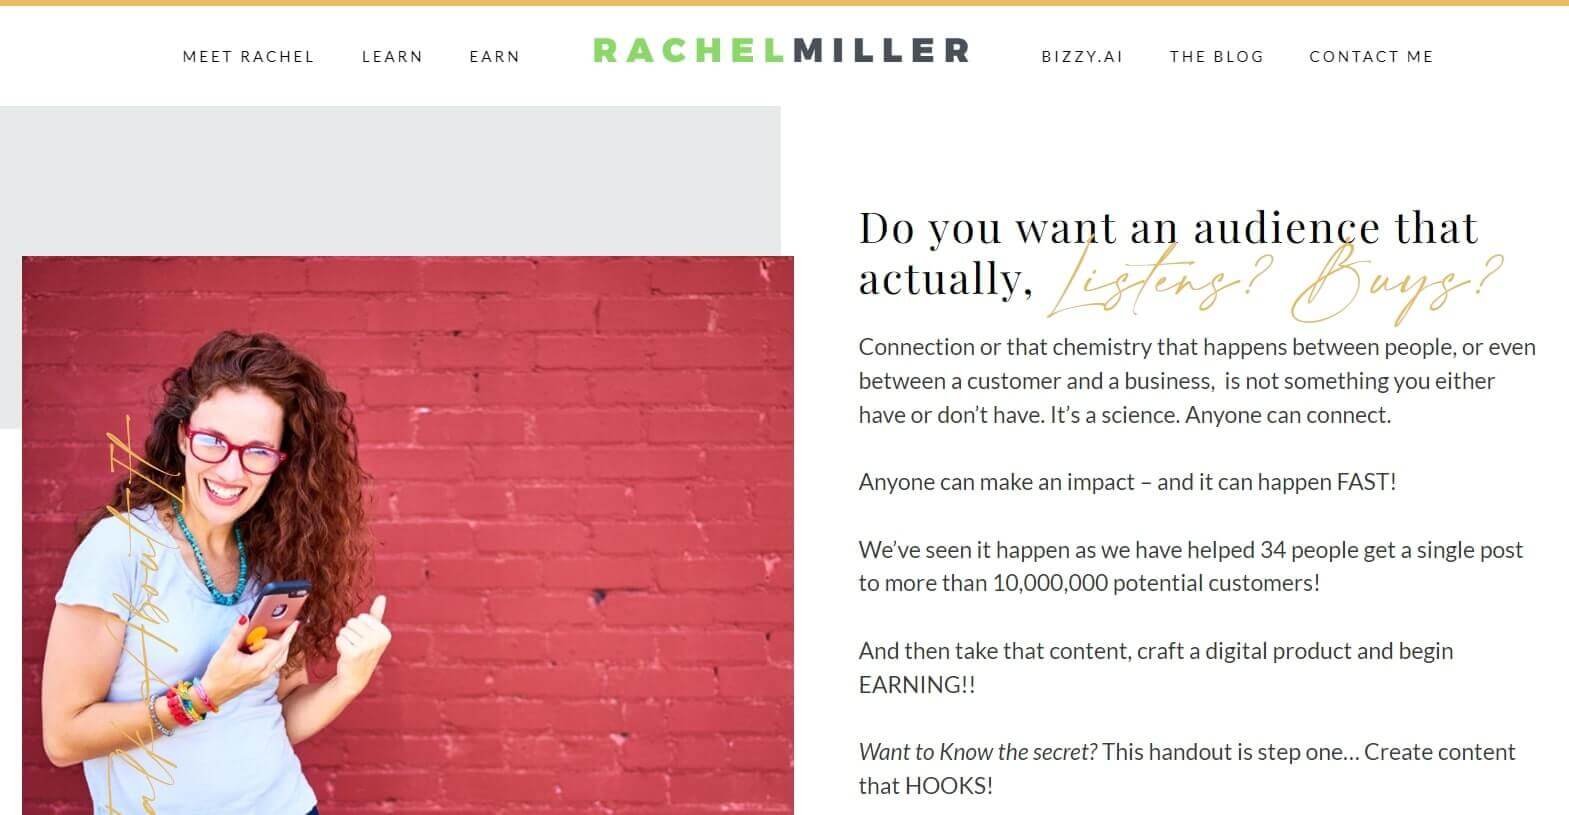 A screenshot of Rachel Miller's website showing her holding a smartphone in front of a bright maroon background on the left, and encouraging site visitors to take action and learn what their audience wants on the right.